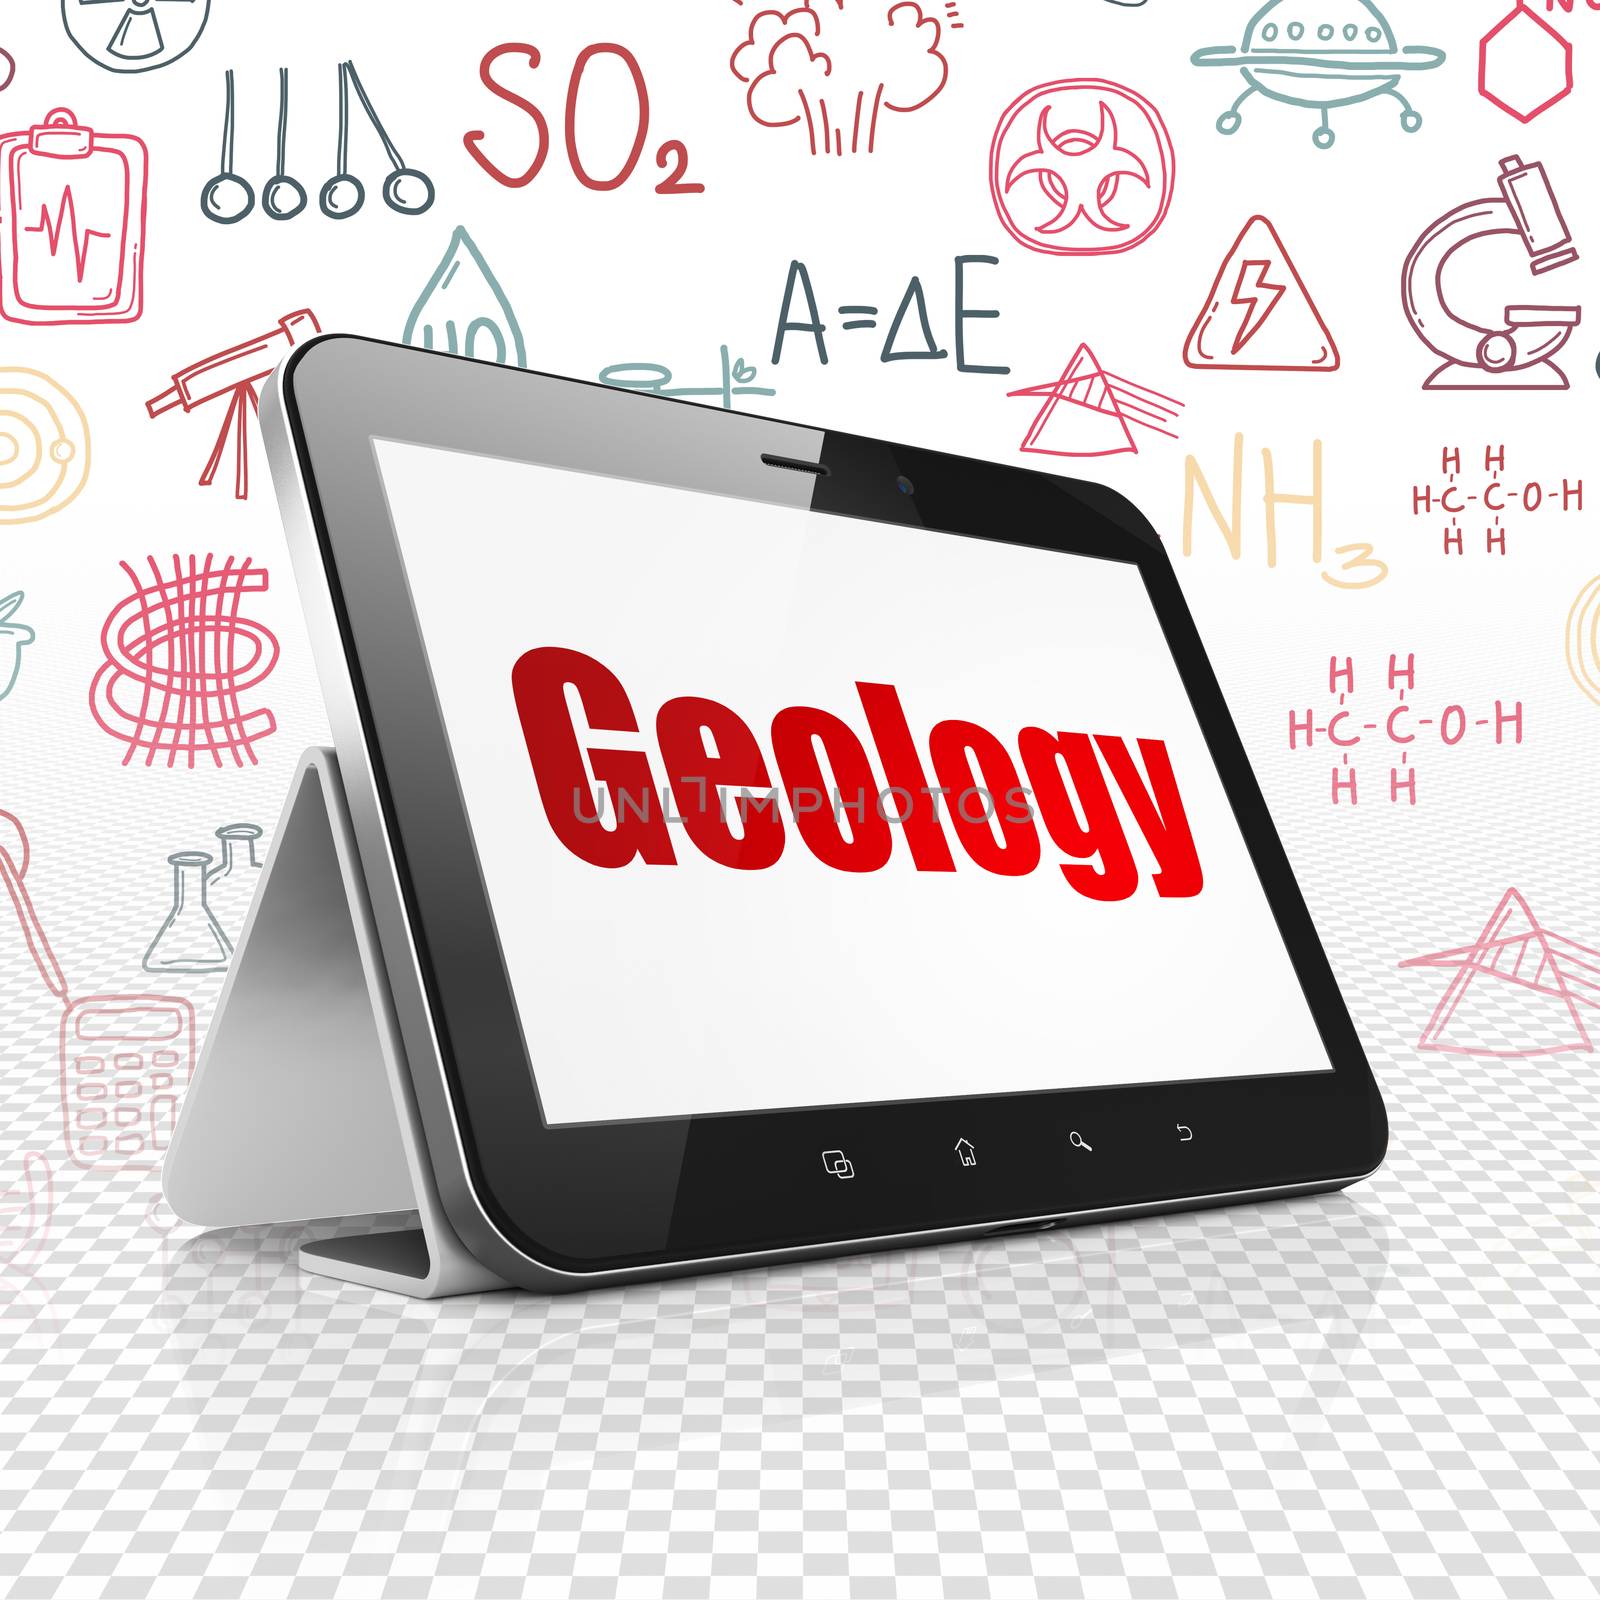 Science concept: Tablet Computer with  red text Geology on display,  Hand Drawn Science Icons background, 3D rendering